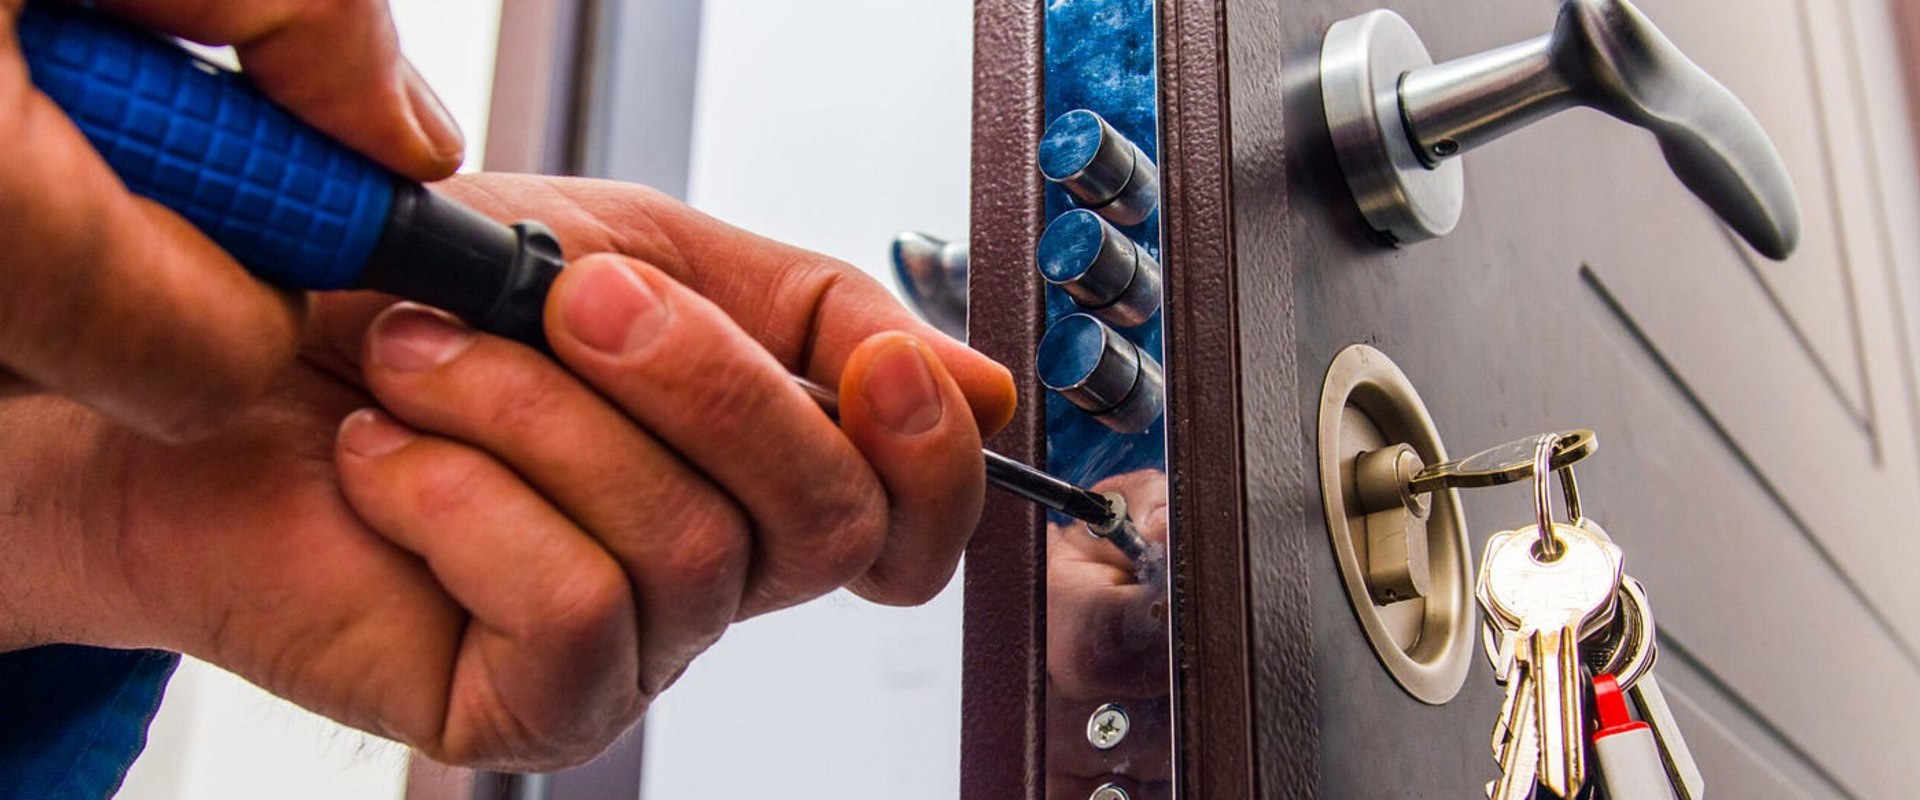 Are Locksmiths Really Thieves?